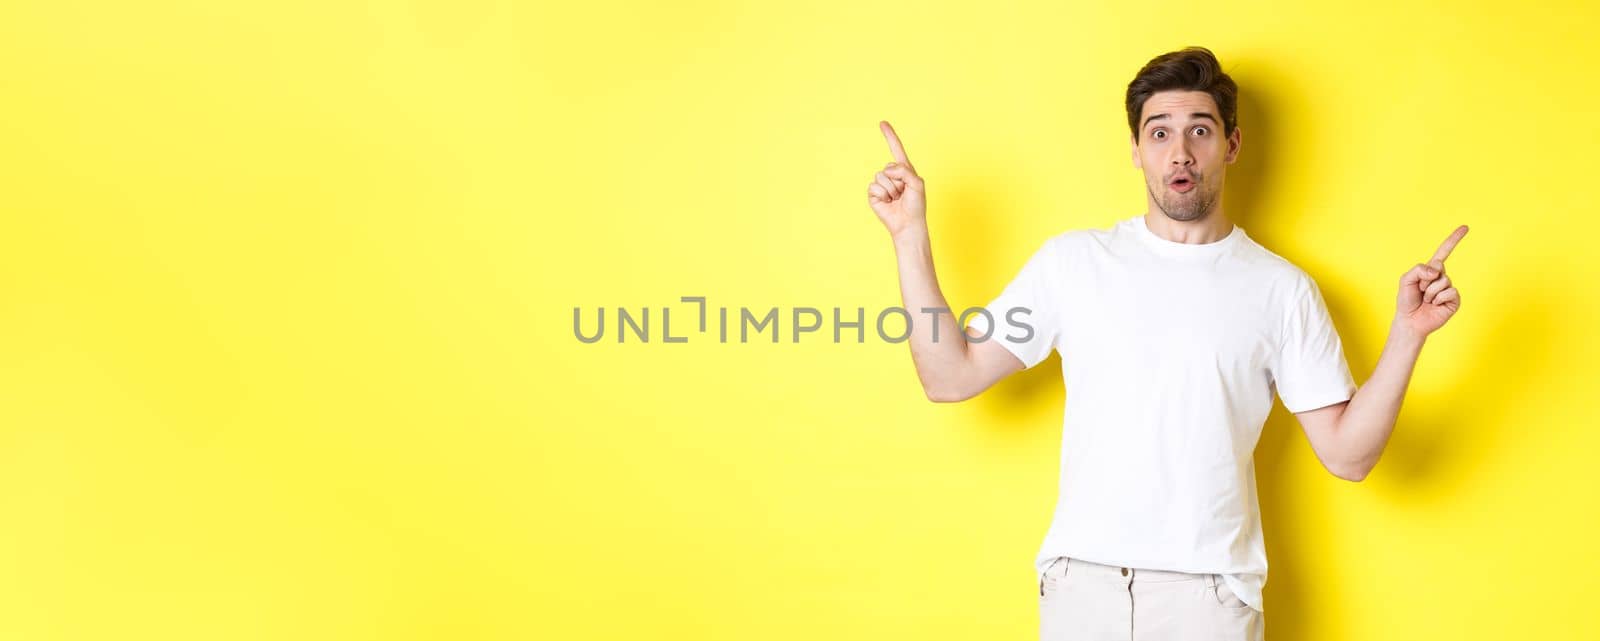 Handsome man pointing fingers sideways, showing two promos, standing over yellow background.